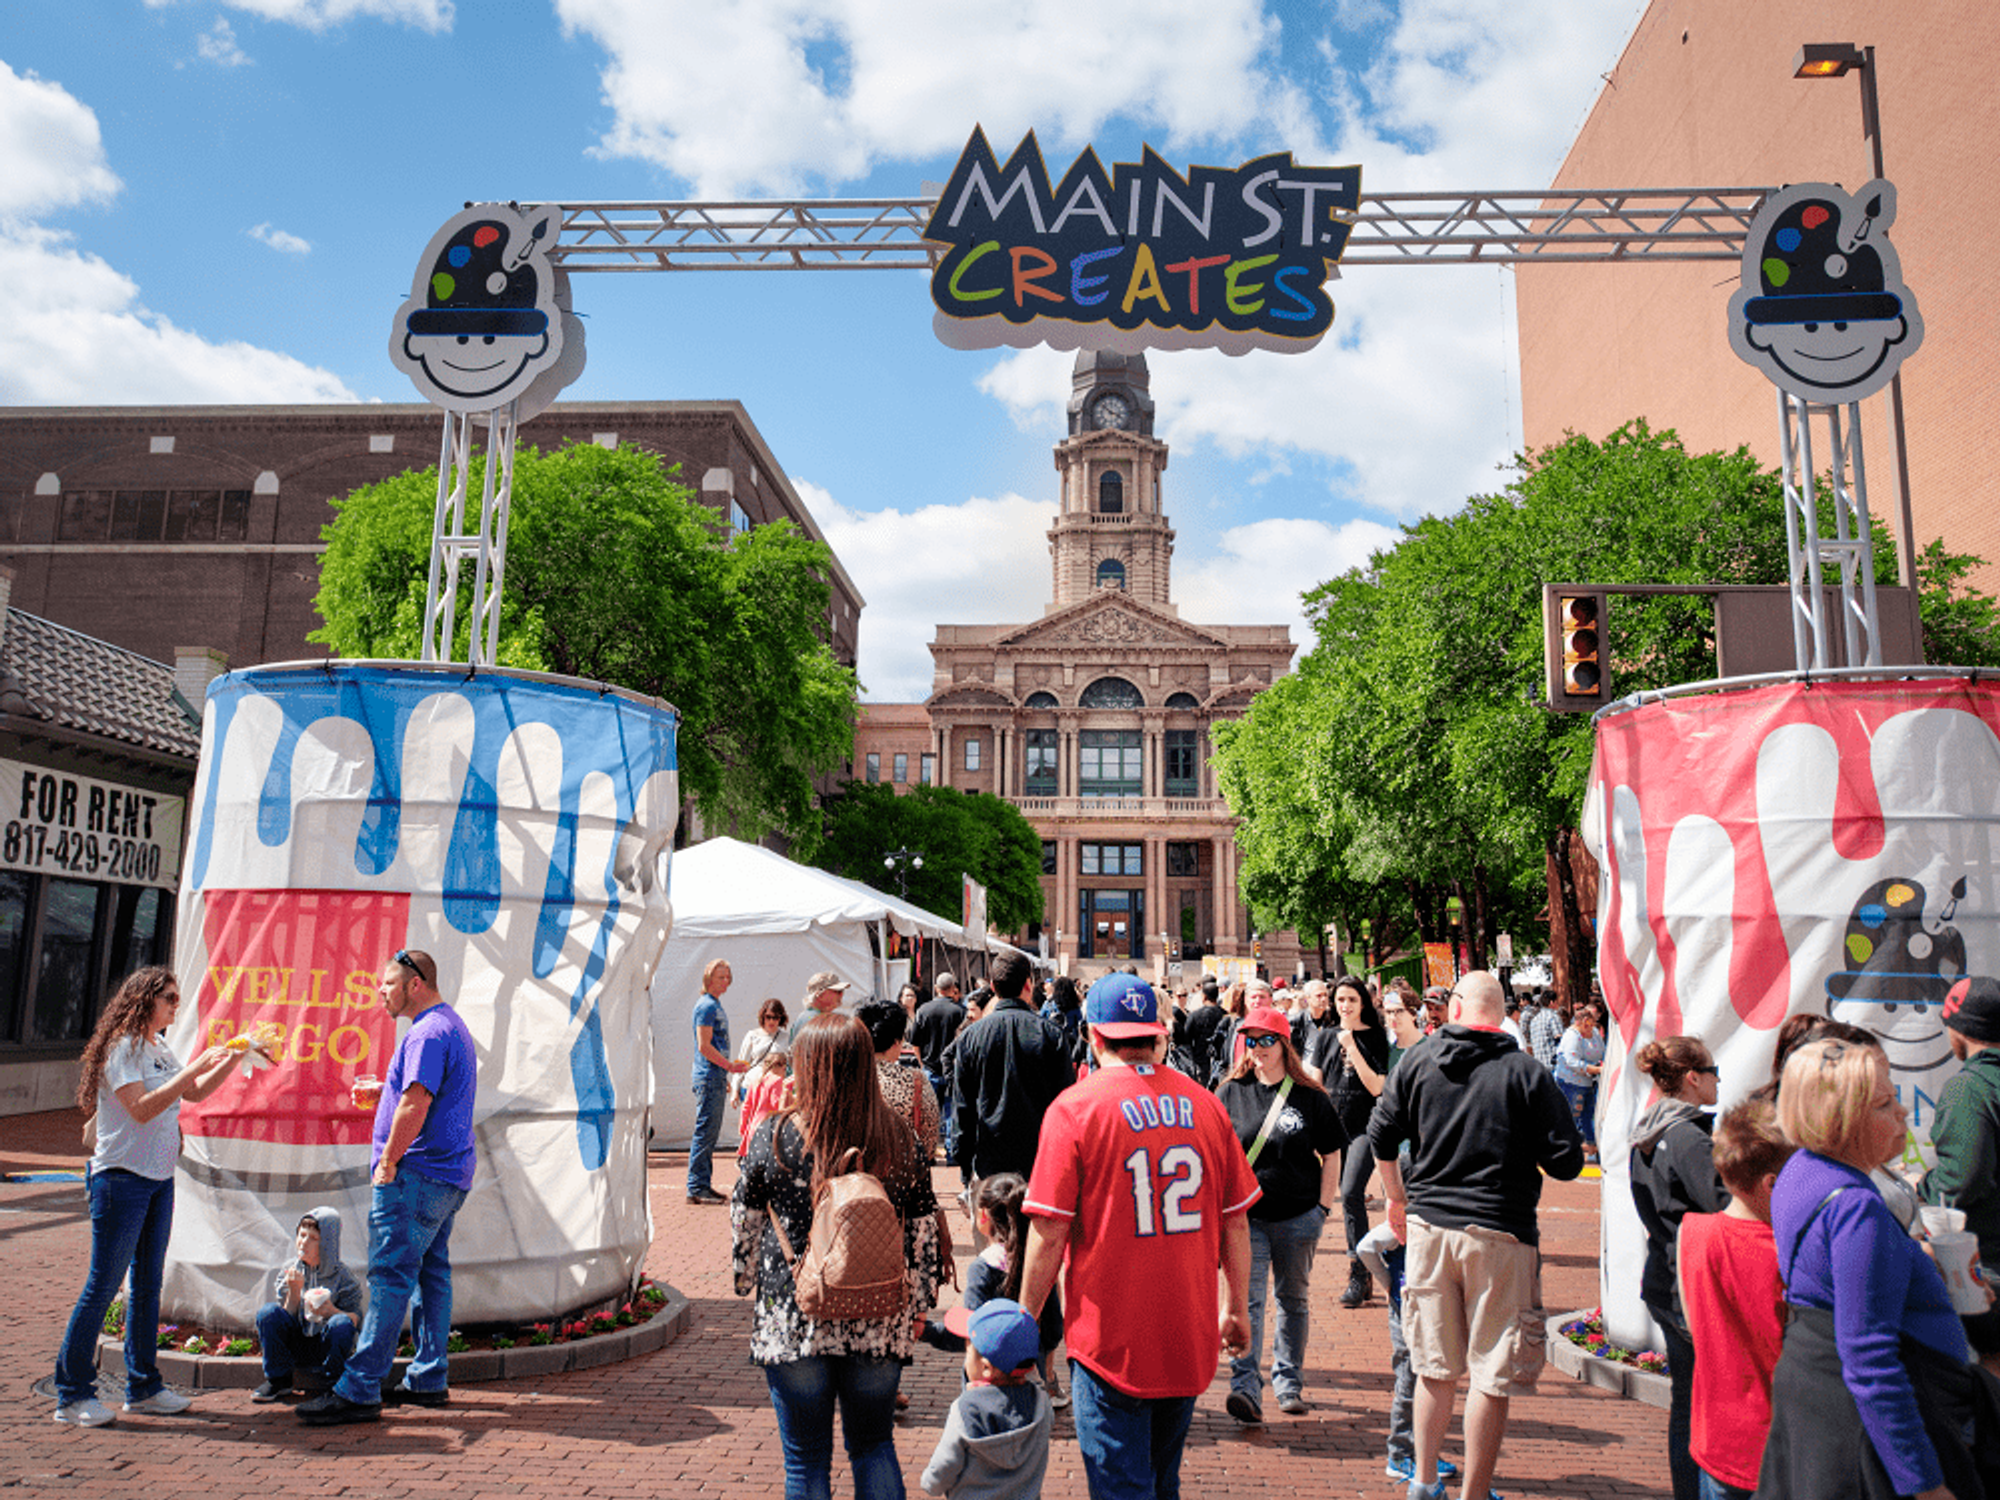 The Main St. Fort Worth Arts Festival will take place in downtown Fort Worth through April 14.